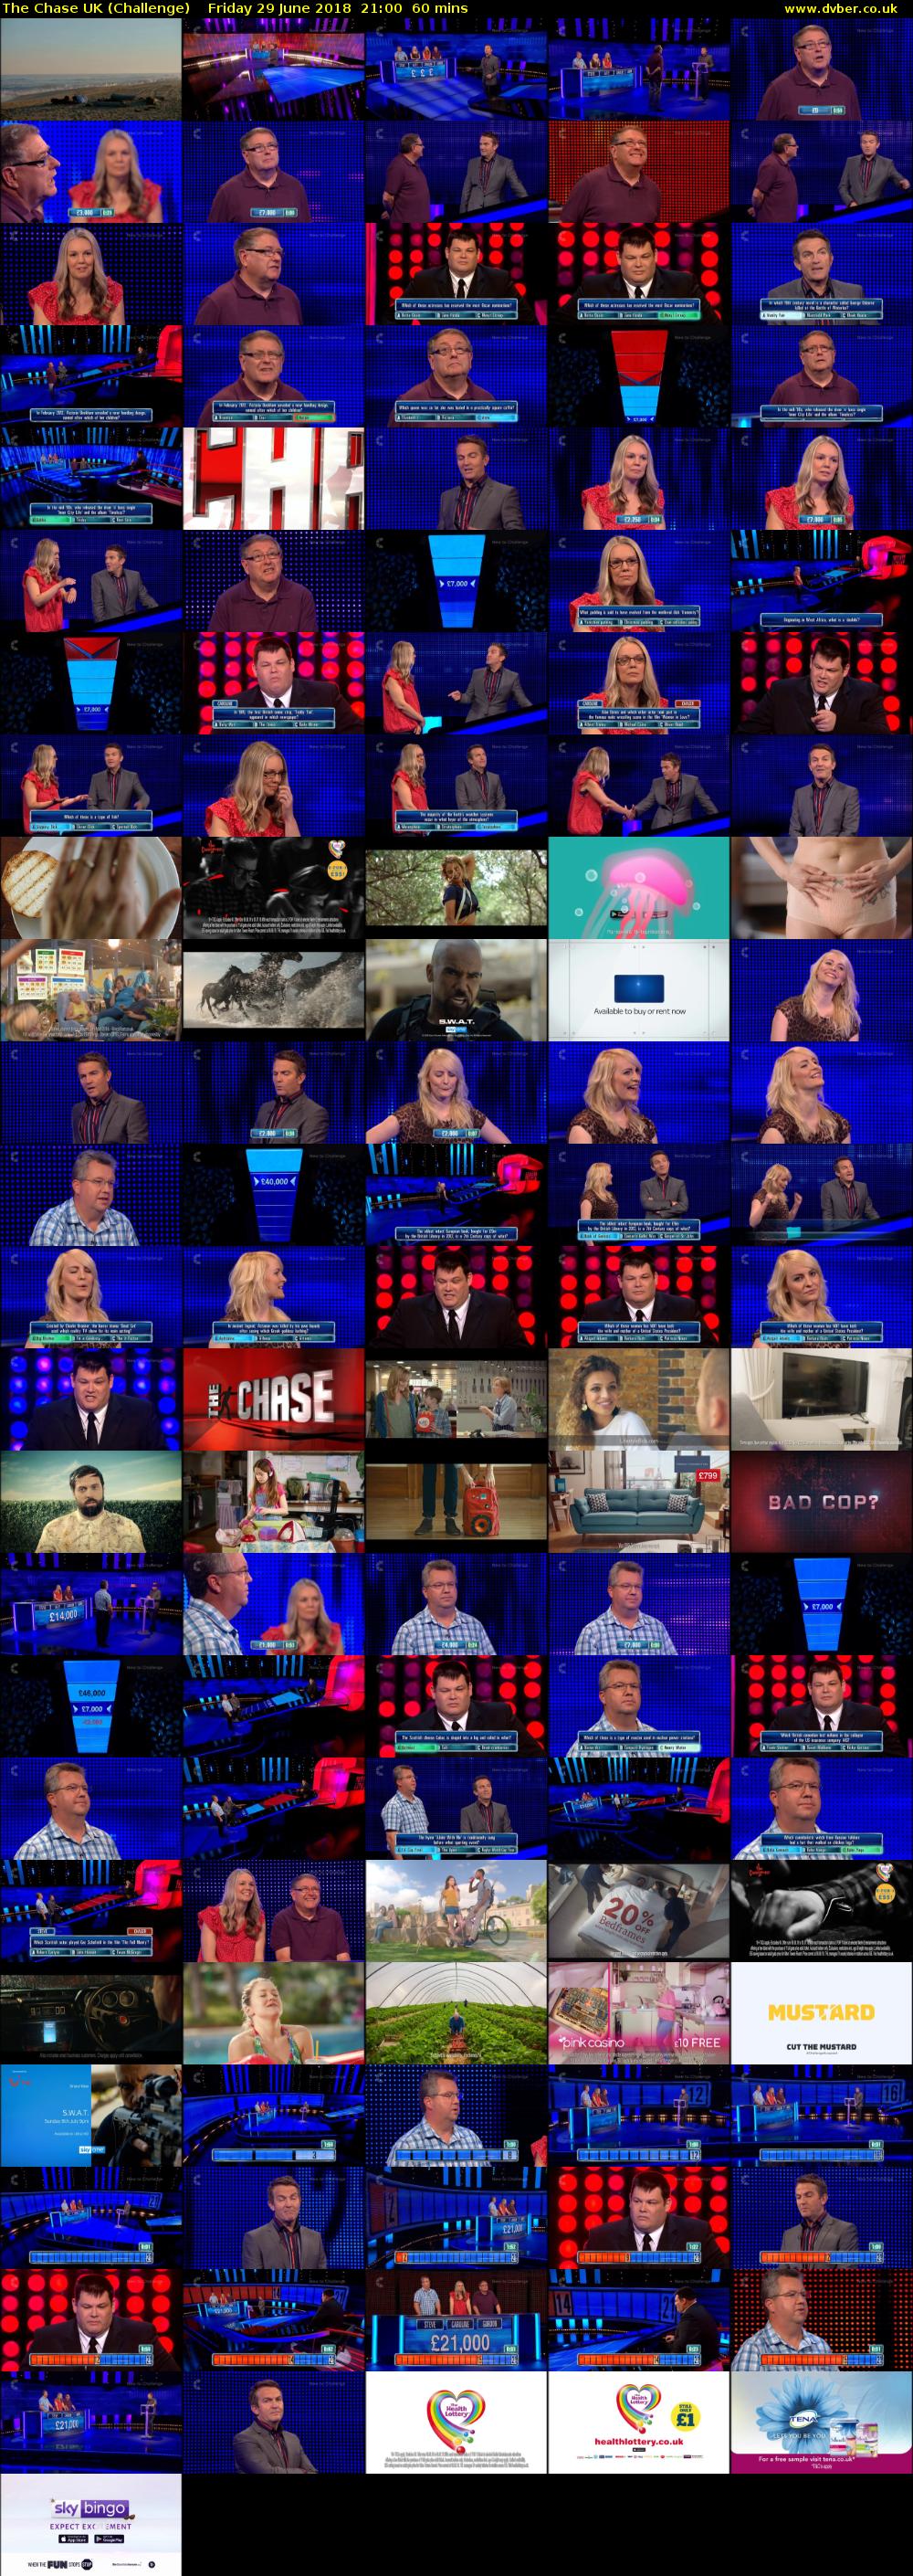 The Chase UK (Challenge) Friday 29 June 2018 21:00 - 22:00